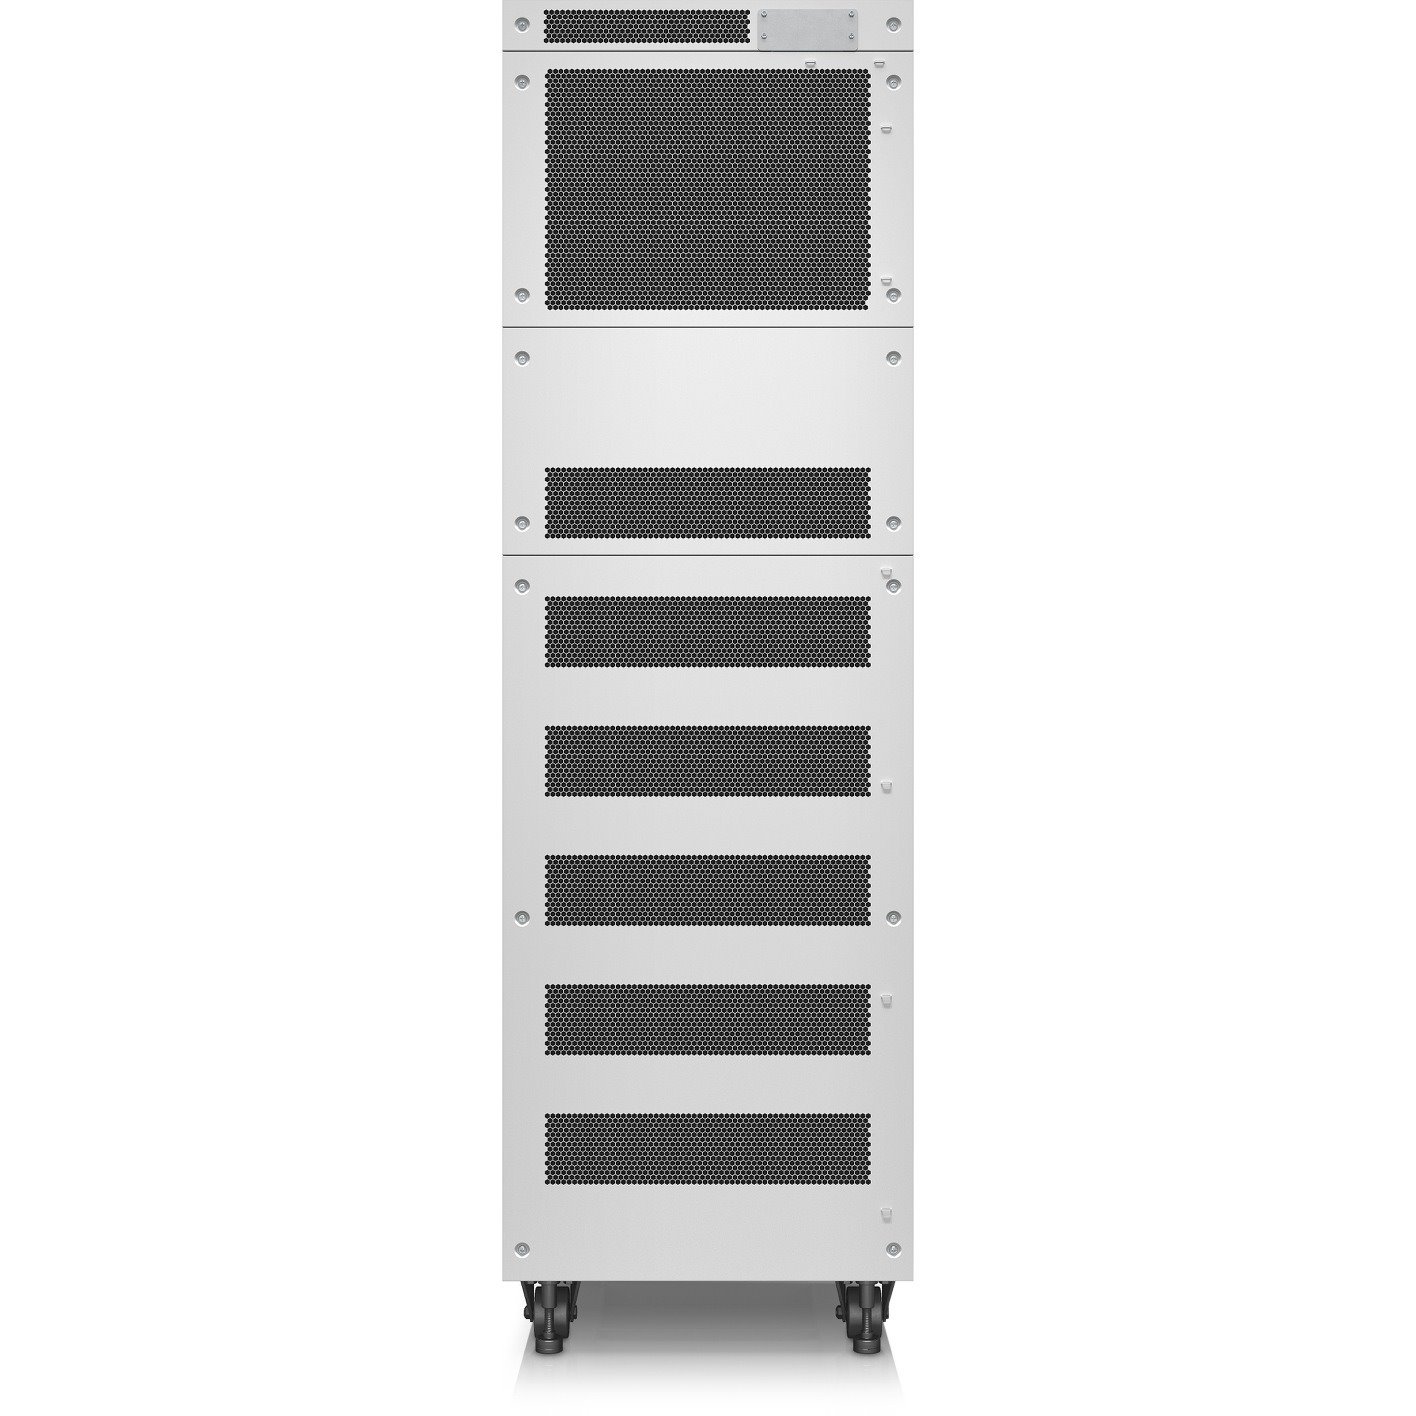 APC by Schneider Electric Easy UPS 3M Double Conversion Online UPS - 60 kVA - Three Phase